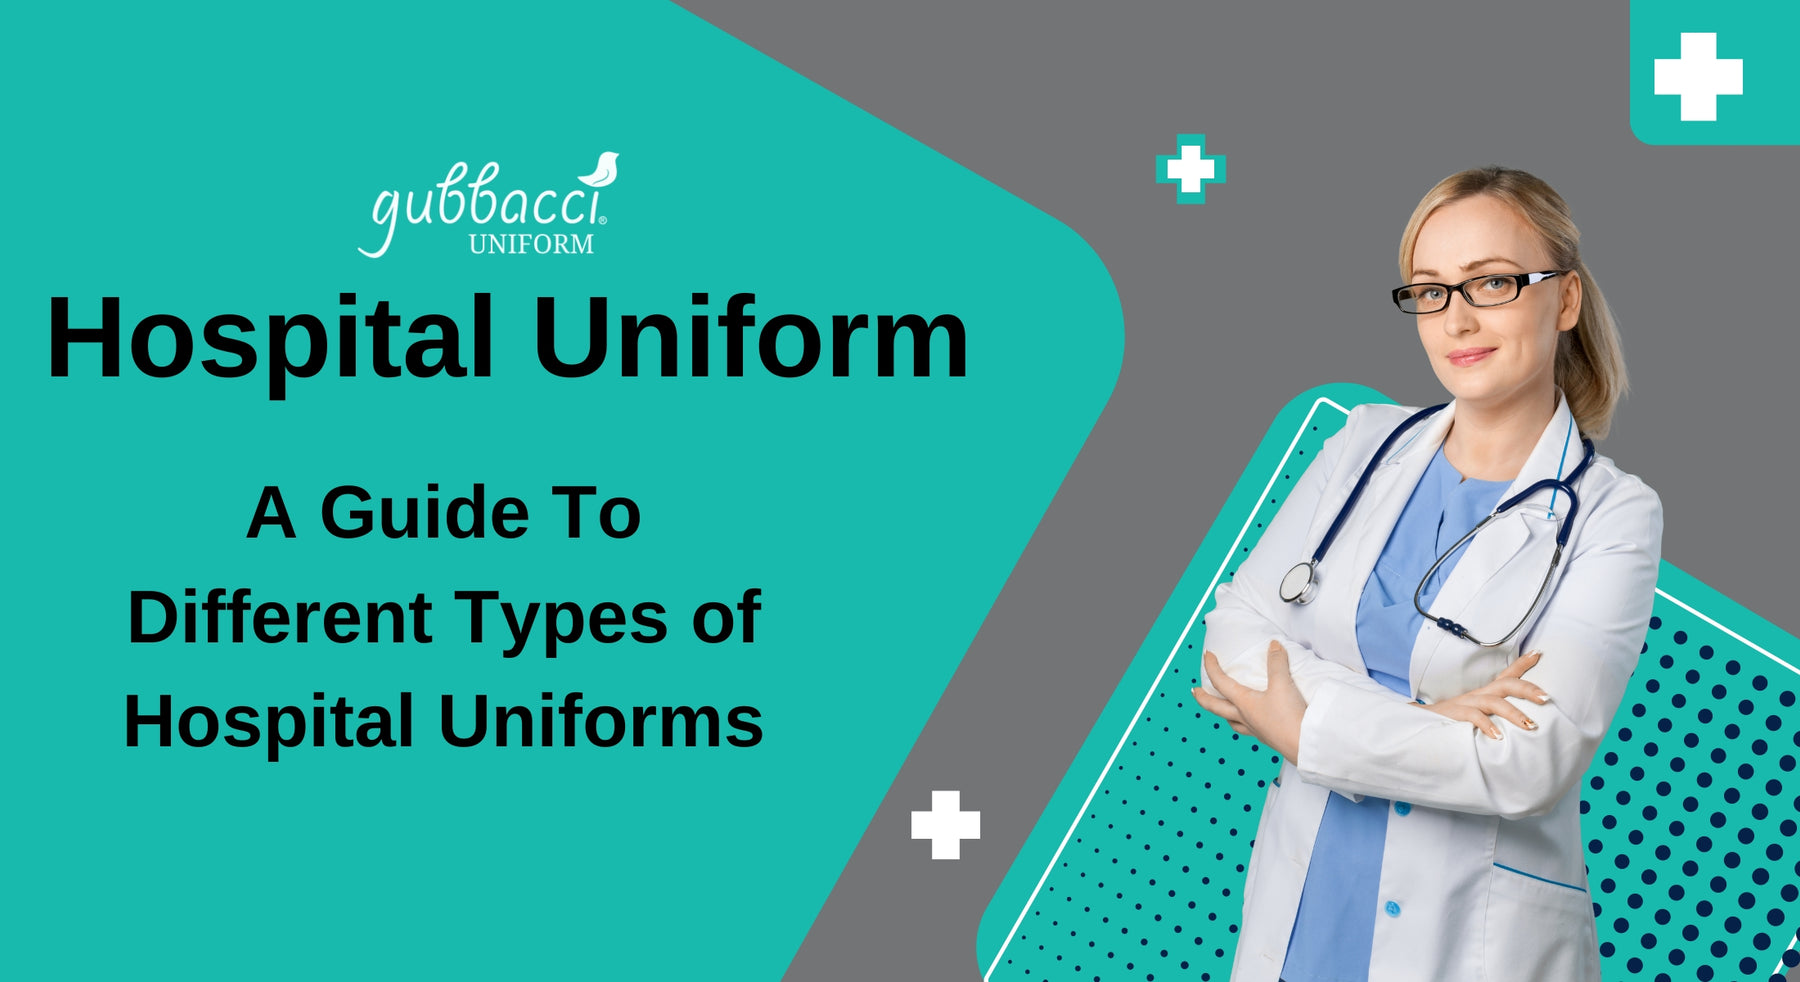 A Guide To Different Types of Hospital Uniforms